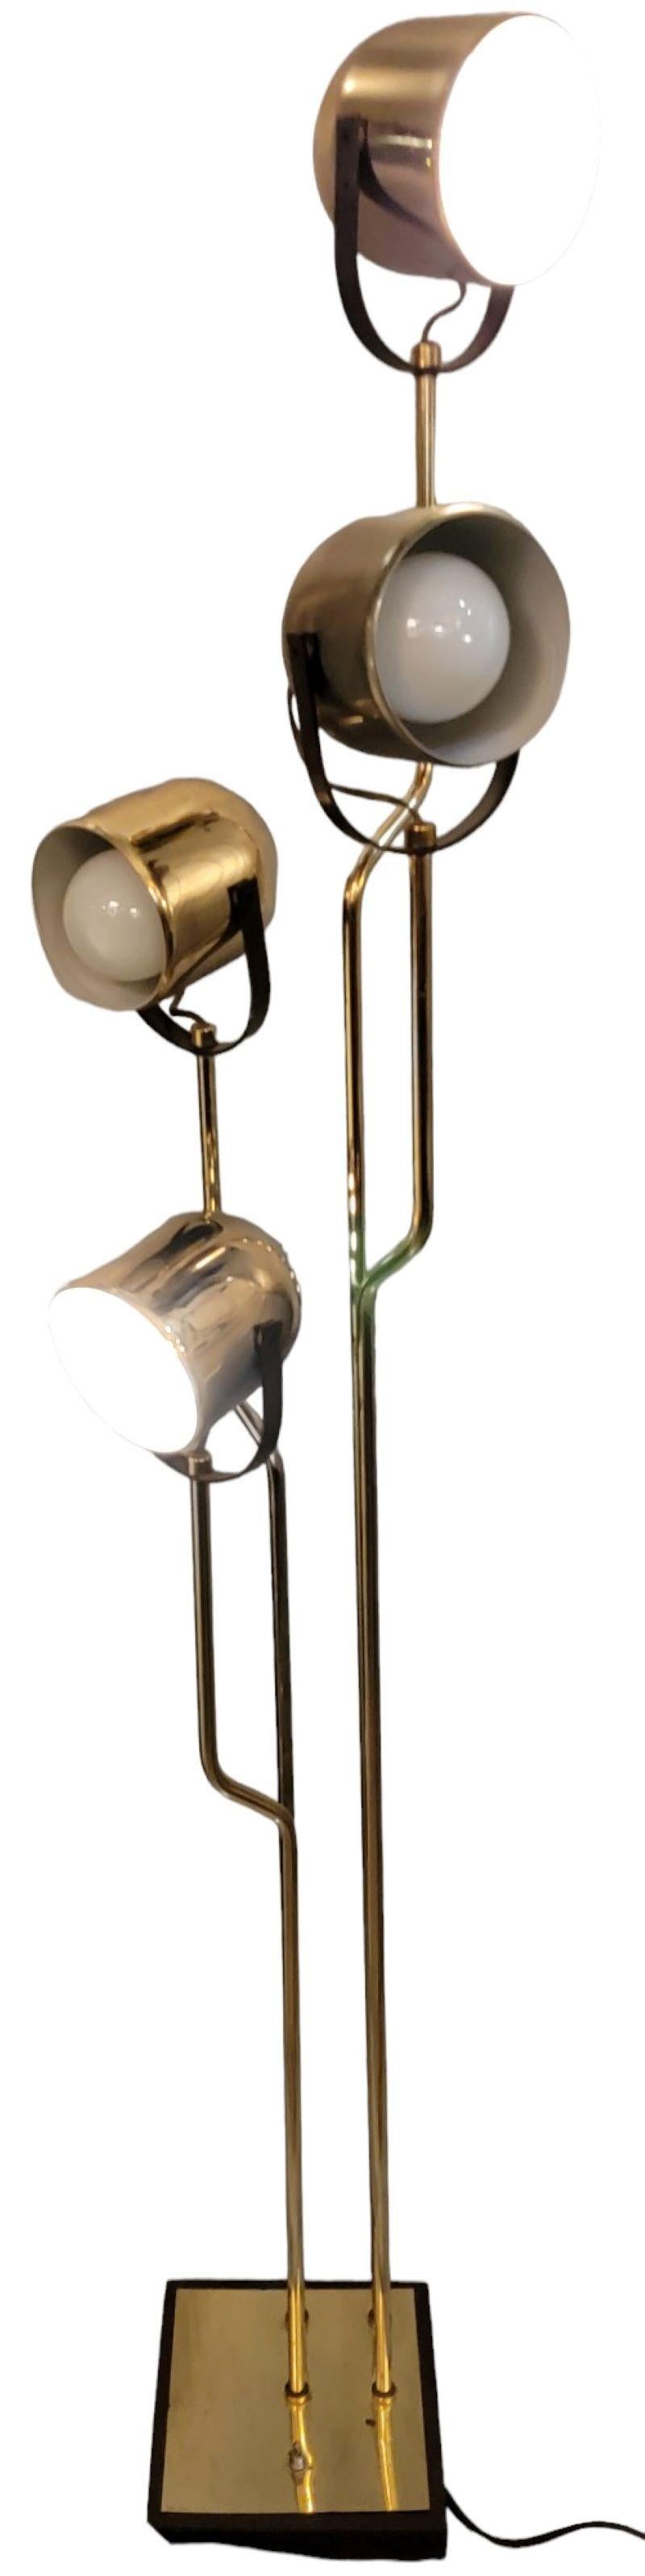 Vintage Italian brass Goffredo Reggiani Four Light Floor Lamp . Each light is adjustable and may be pointed  turned 360 degrees side ways and Just over 180 degrees upward. Measures  approx - 12 x 12 x 65 at longest points. Wear due to age has